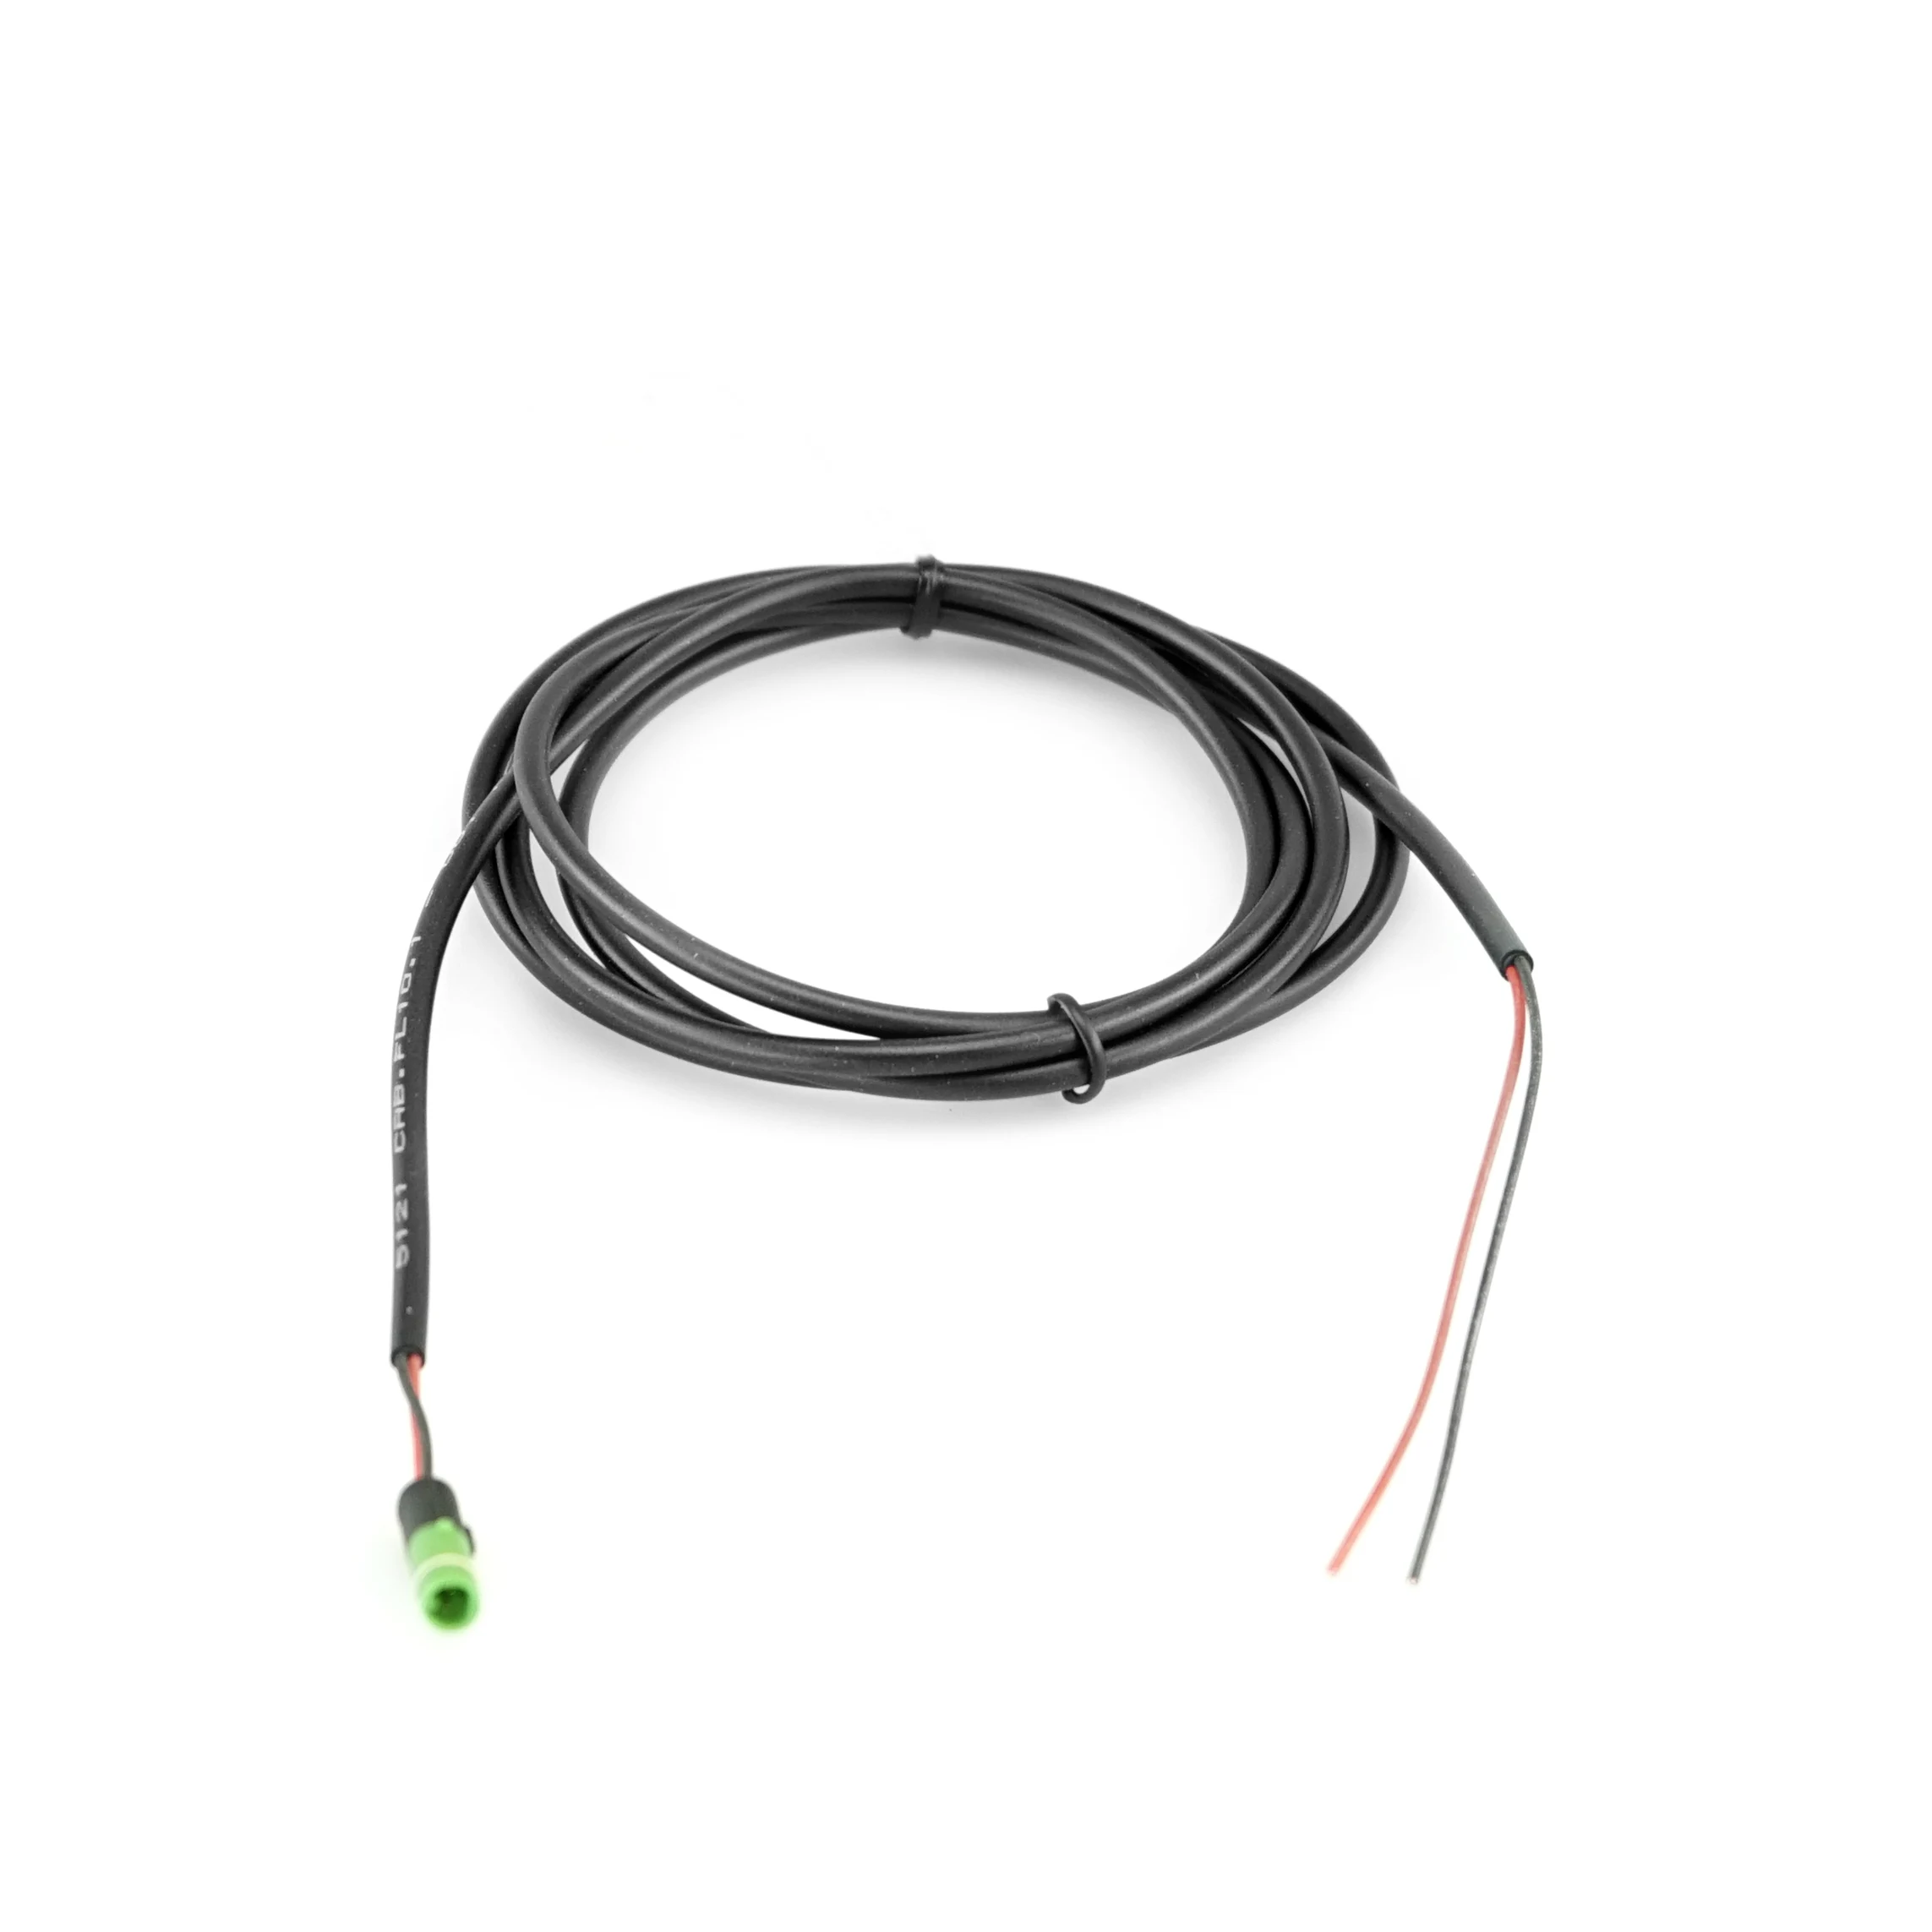 FIT light cable with Brose plug for headlights without plug